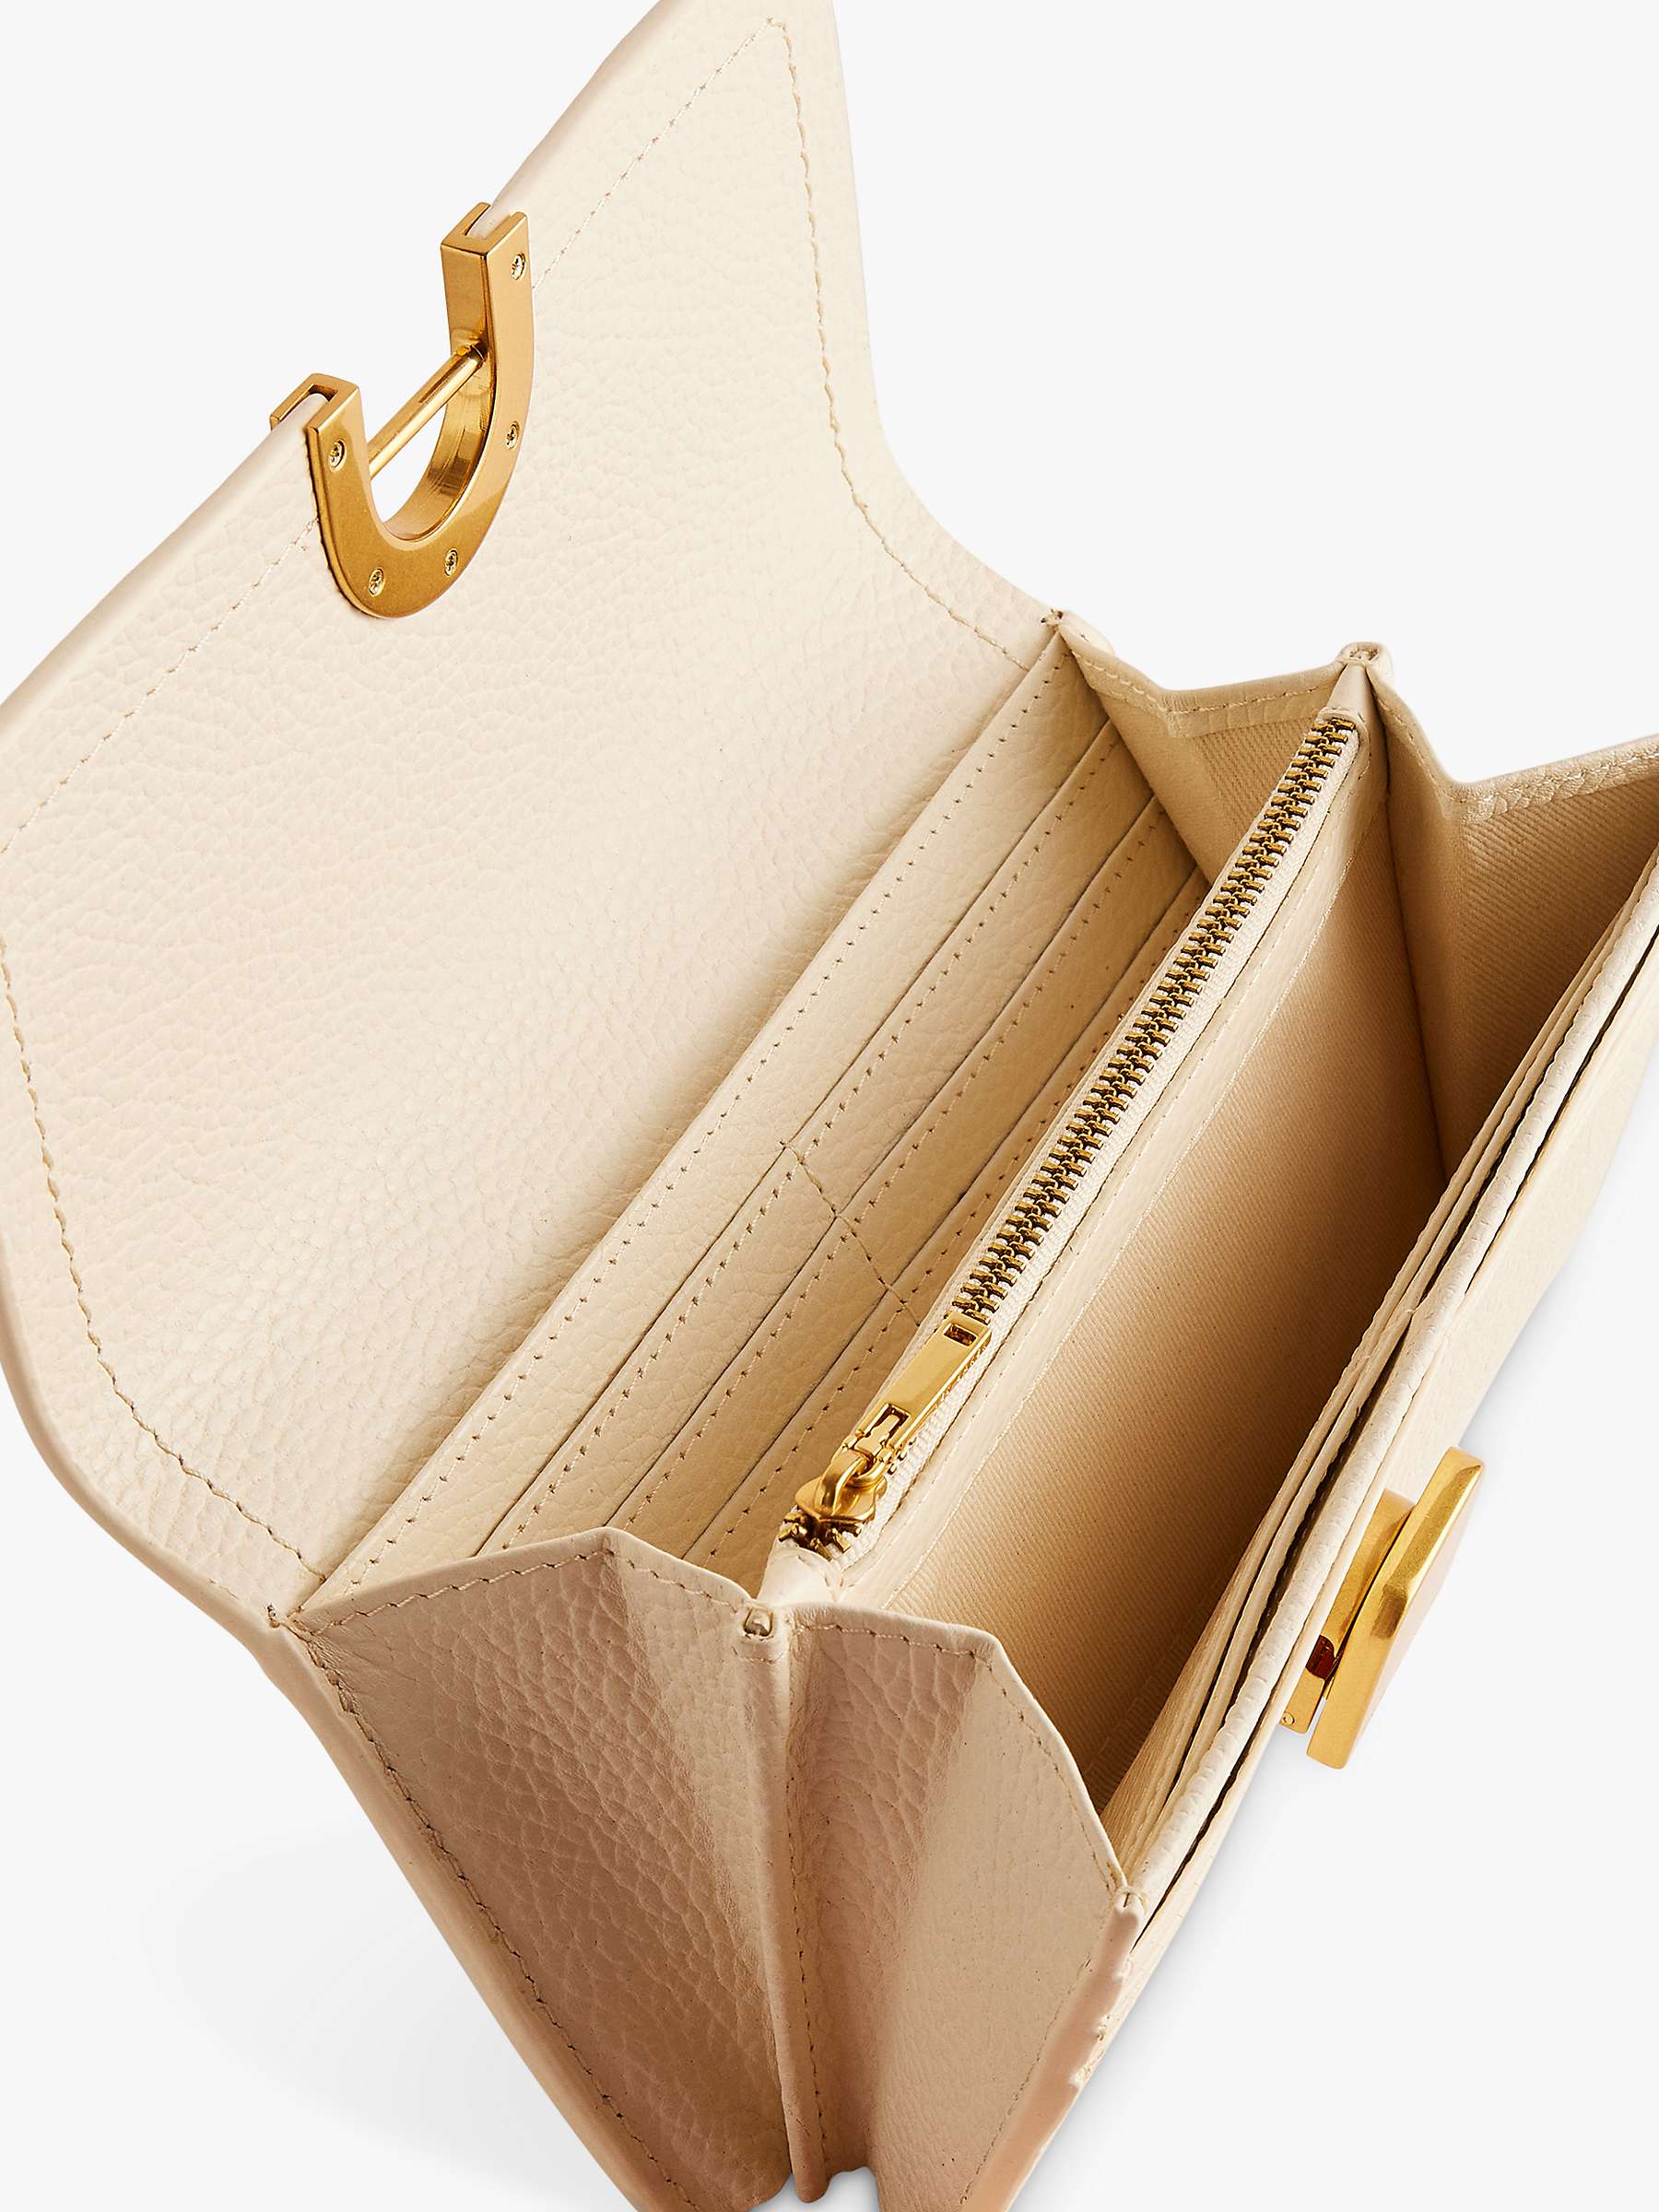 Buy Ted Baker Imieldi Lock Detail Flapover Purse Online at johnlewis.com